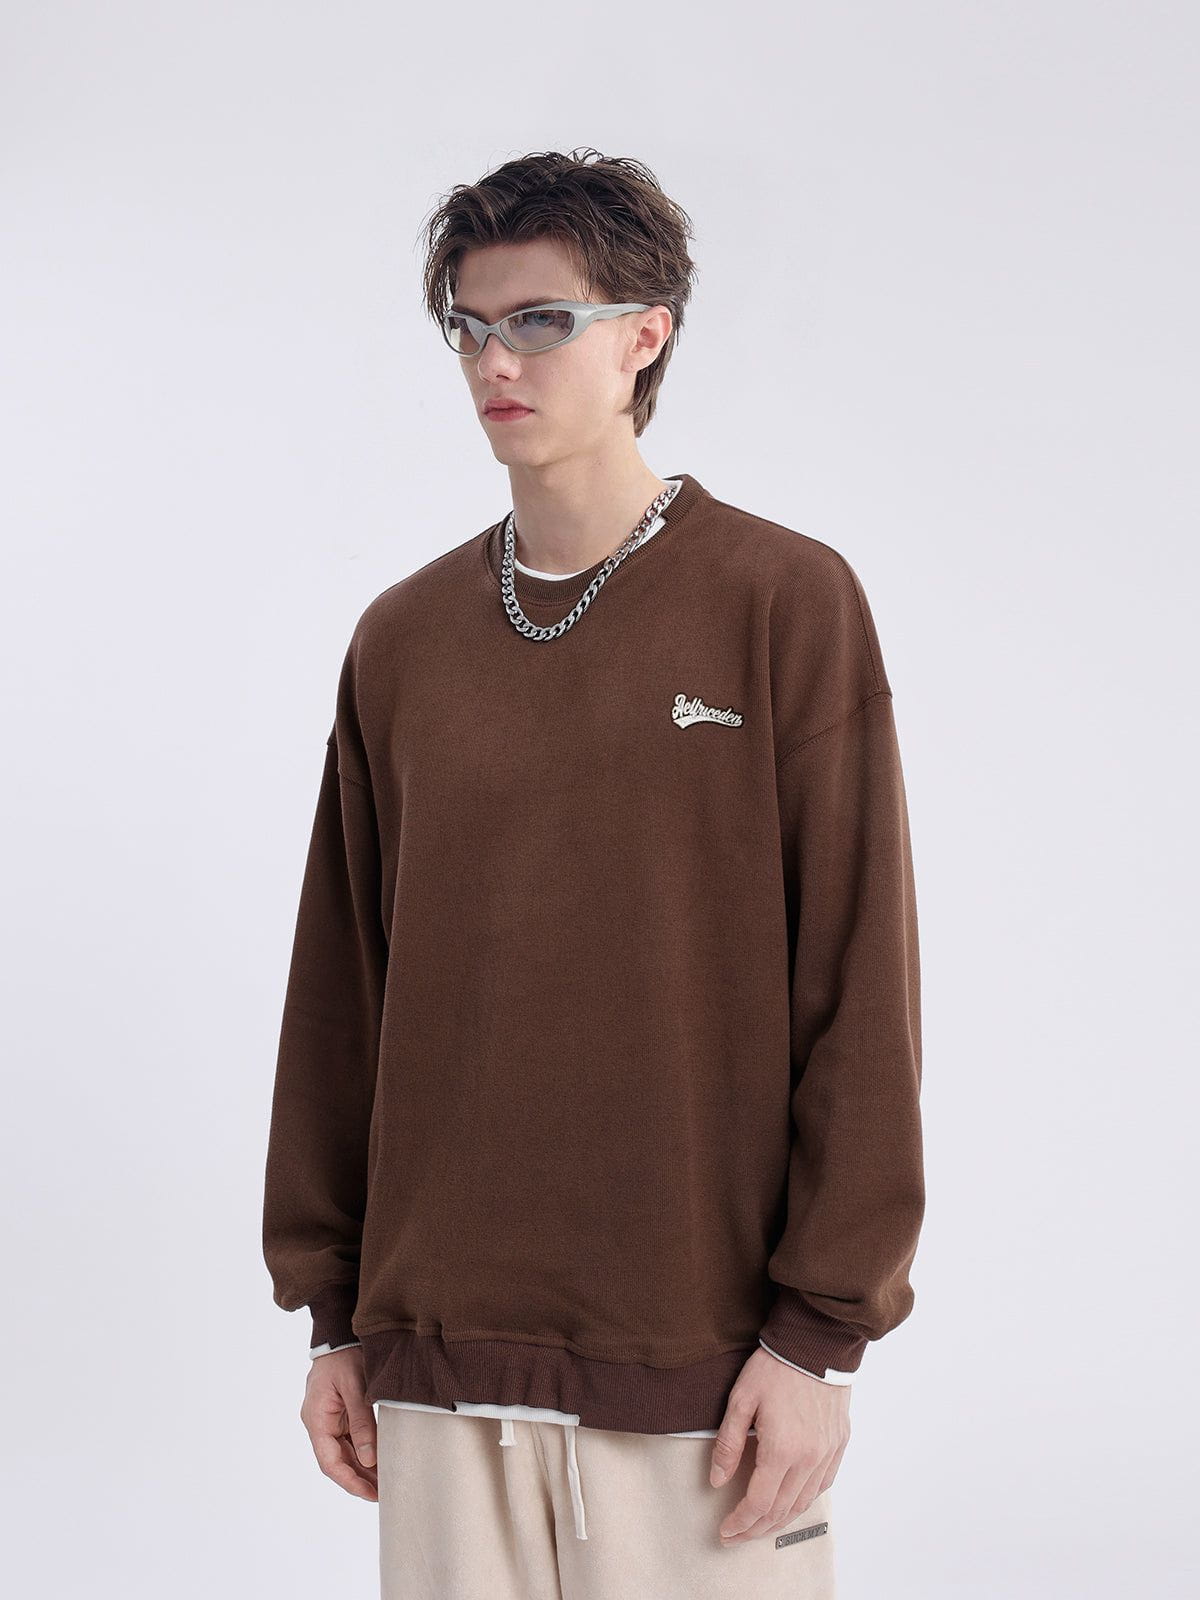 Aelfric Eden Solid Color Fake Two Sweatshirt